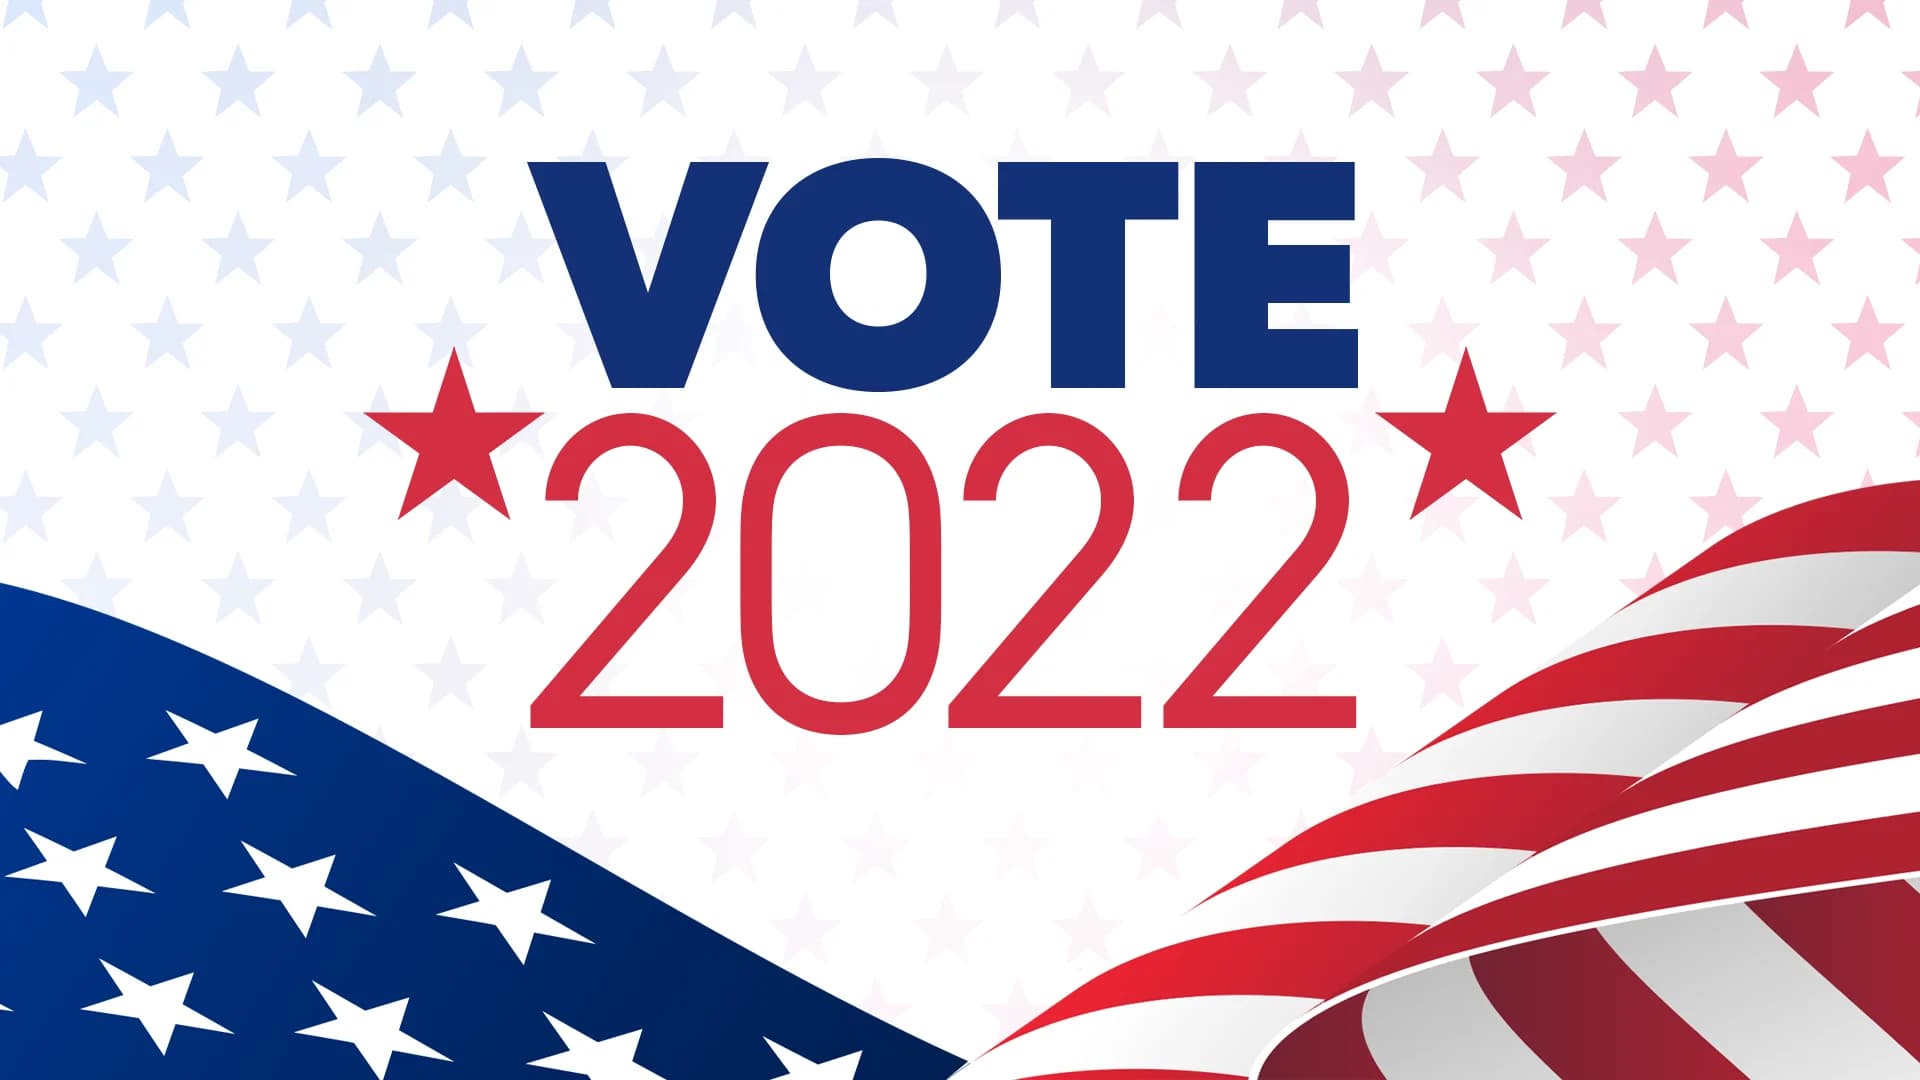 HUDSON VALLEY VOTE 2022: Complete results and coverage